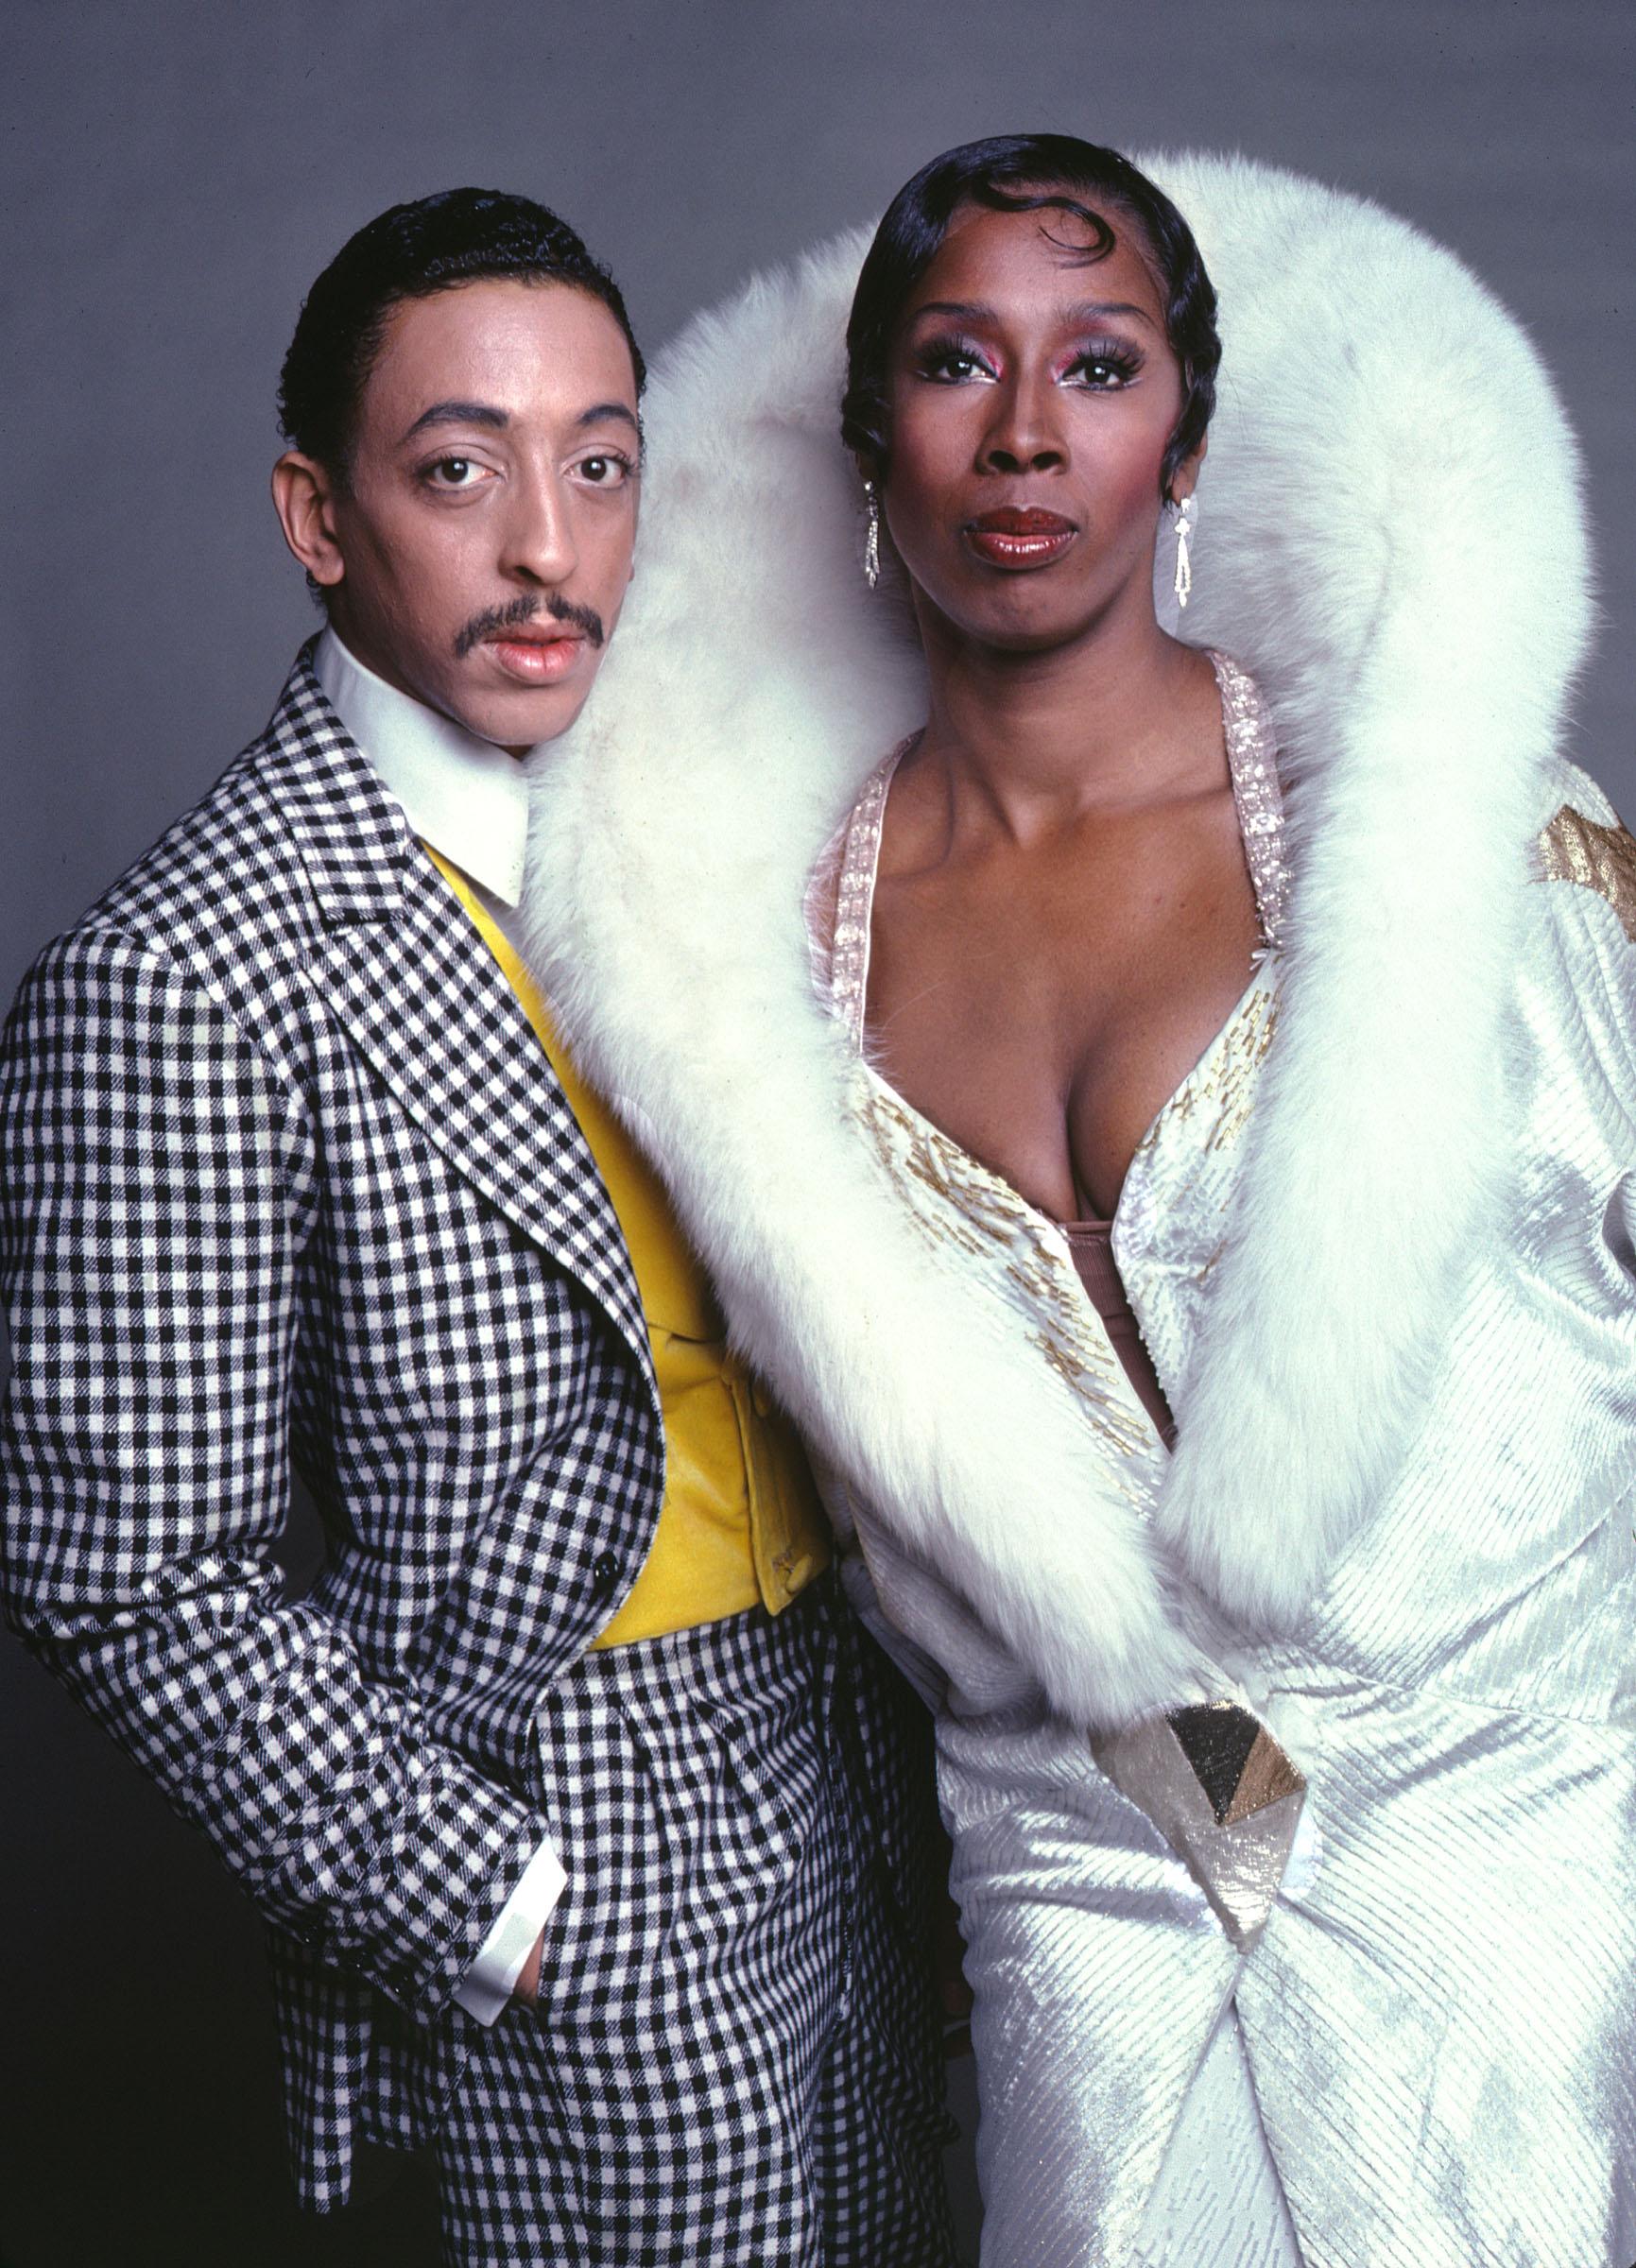 Gregory Hines & Judith Jamison in 'Sophisticated Ladies', Color 17 x 22" 